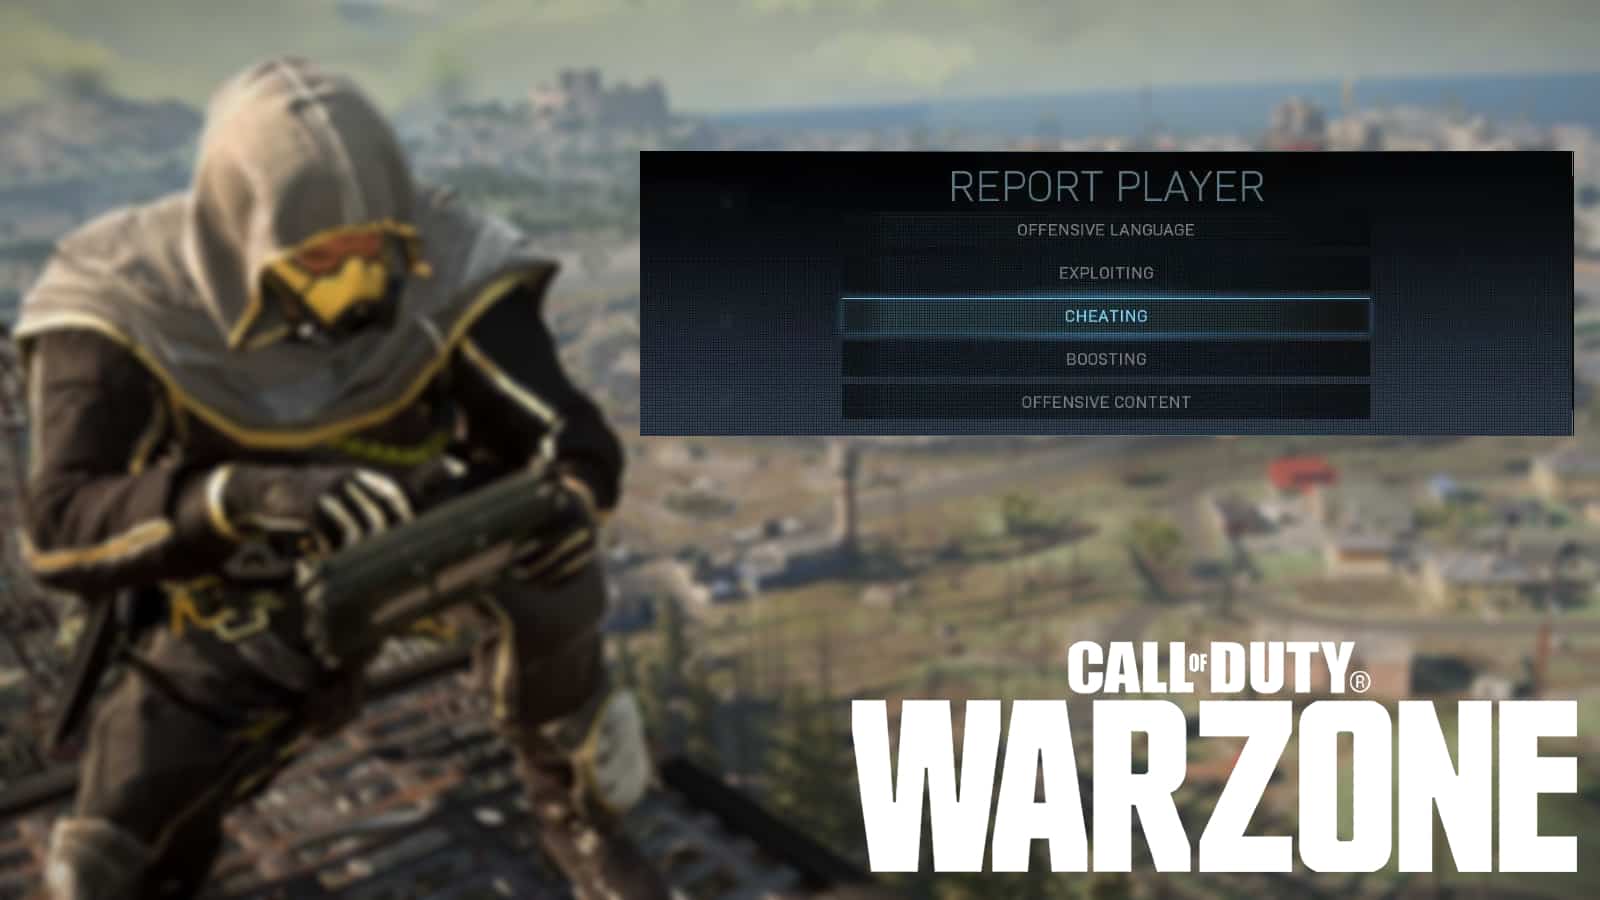 Warzone fans demand overhaul for report system as cheaters run wild